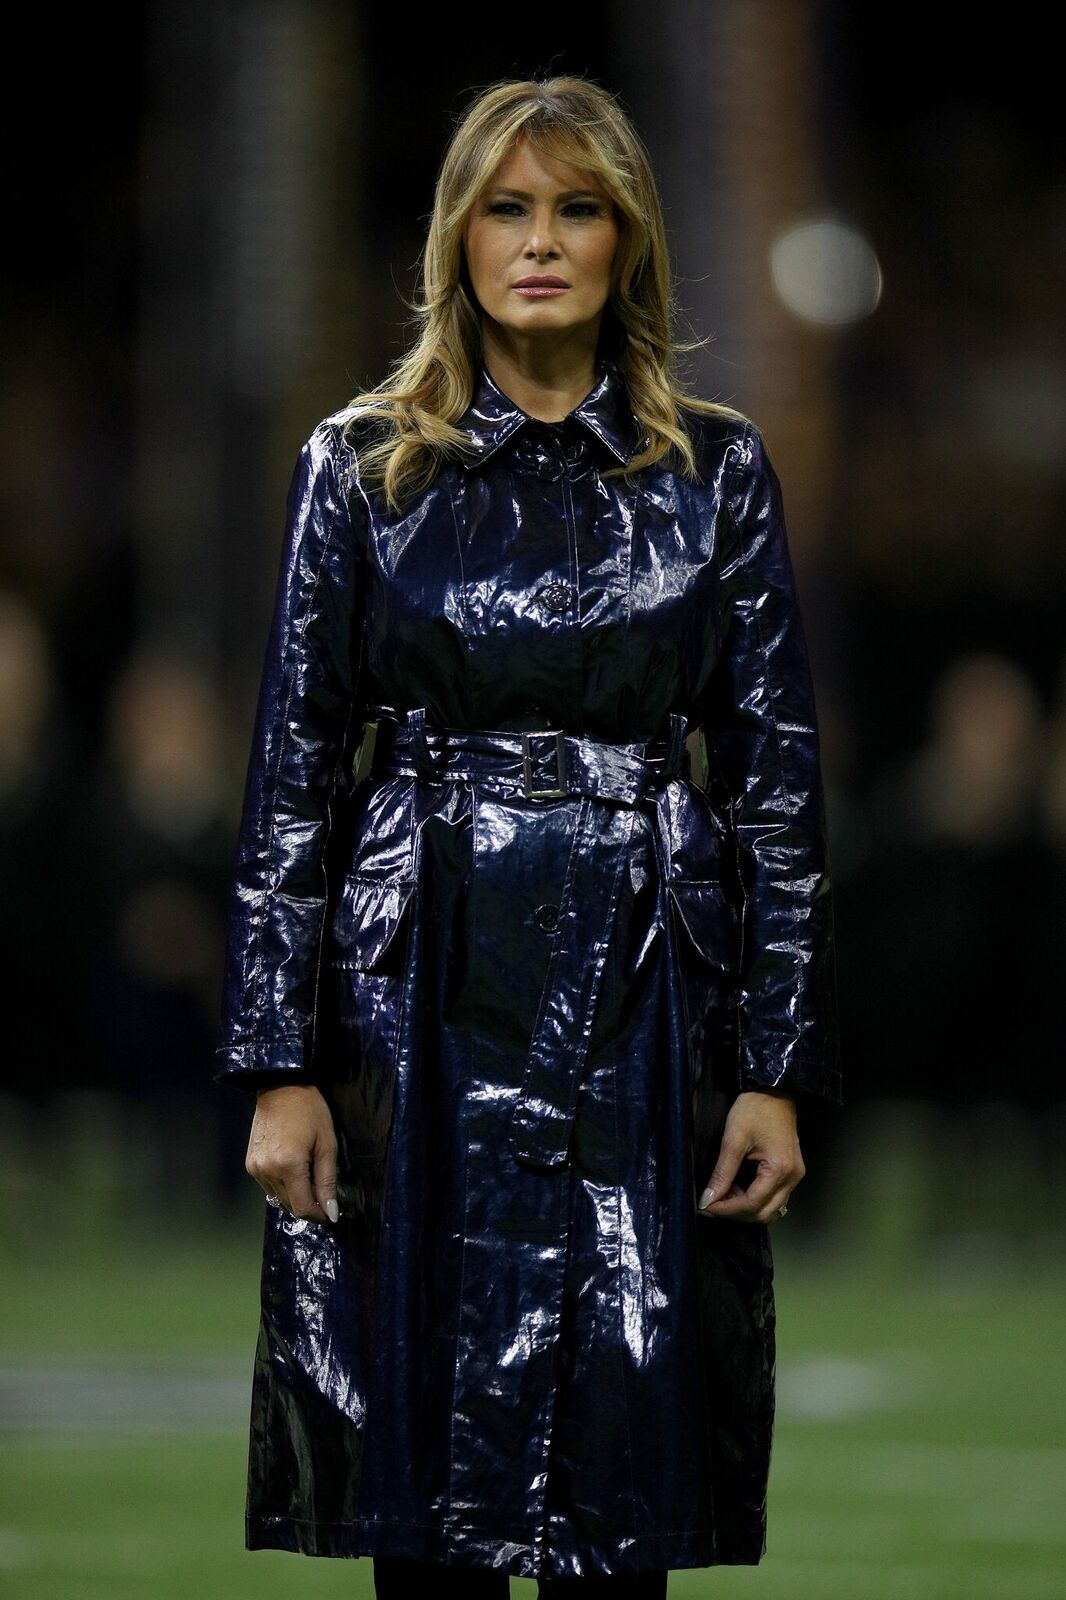 First Lady Melania Trump at the College Football Playoff National Championship game held at Mercedes Benz Superdome on January 13, 2020, in New Orleans, Louisiana | Photo: Chris Graythen/Getty Images